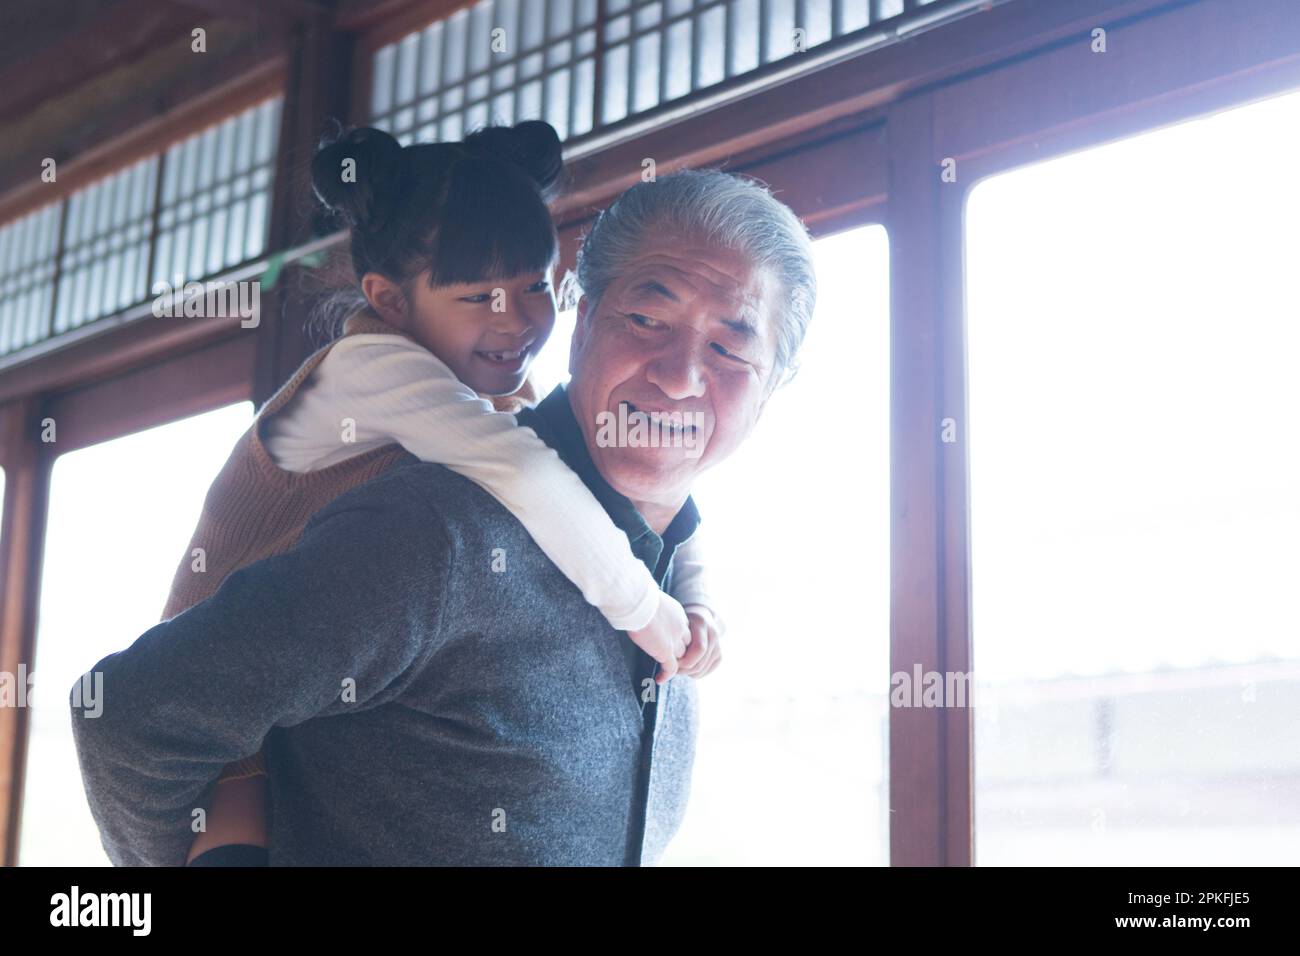 A senior man and his grandson giving a piggyback ride in a country house Stock Photo